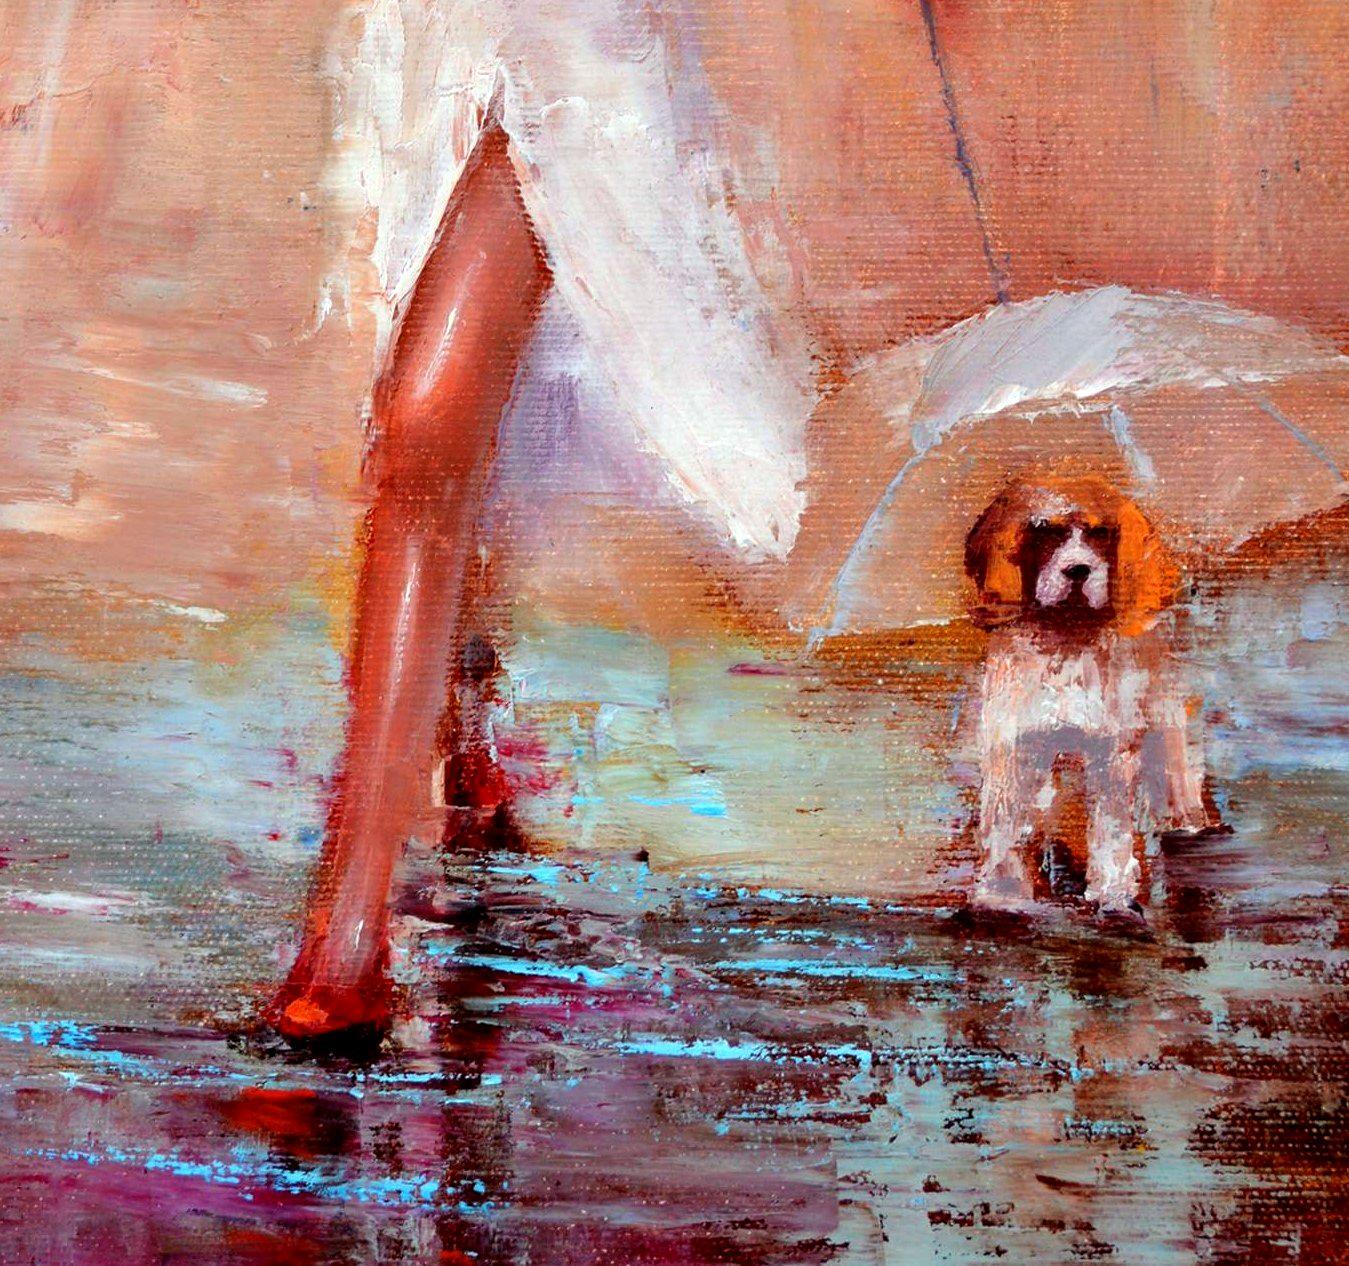 In this oil painting, I've captured a serene stroll, both playful and introspective. The vibrant umbrella stands against the soothing backdrop, a dance of color and light, invoking a sense of calm during life's storms. It's an embrace of joy and